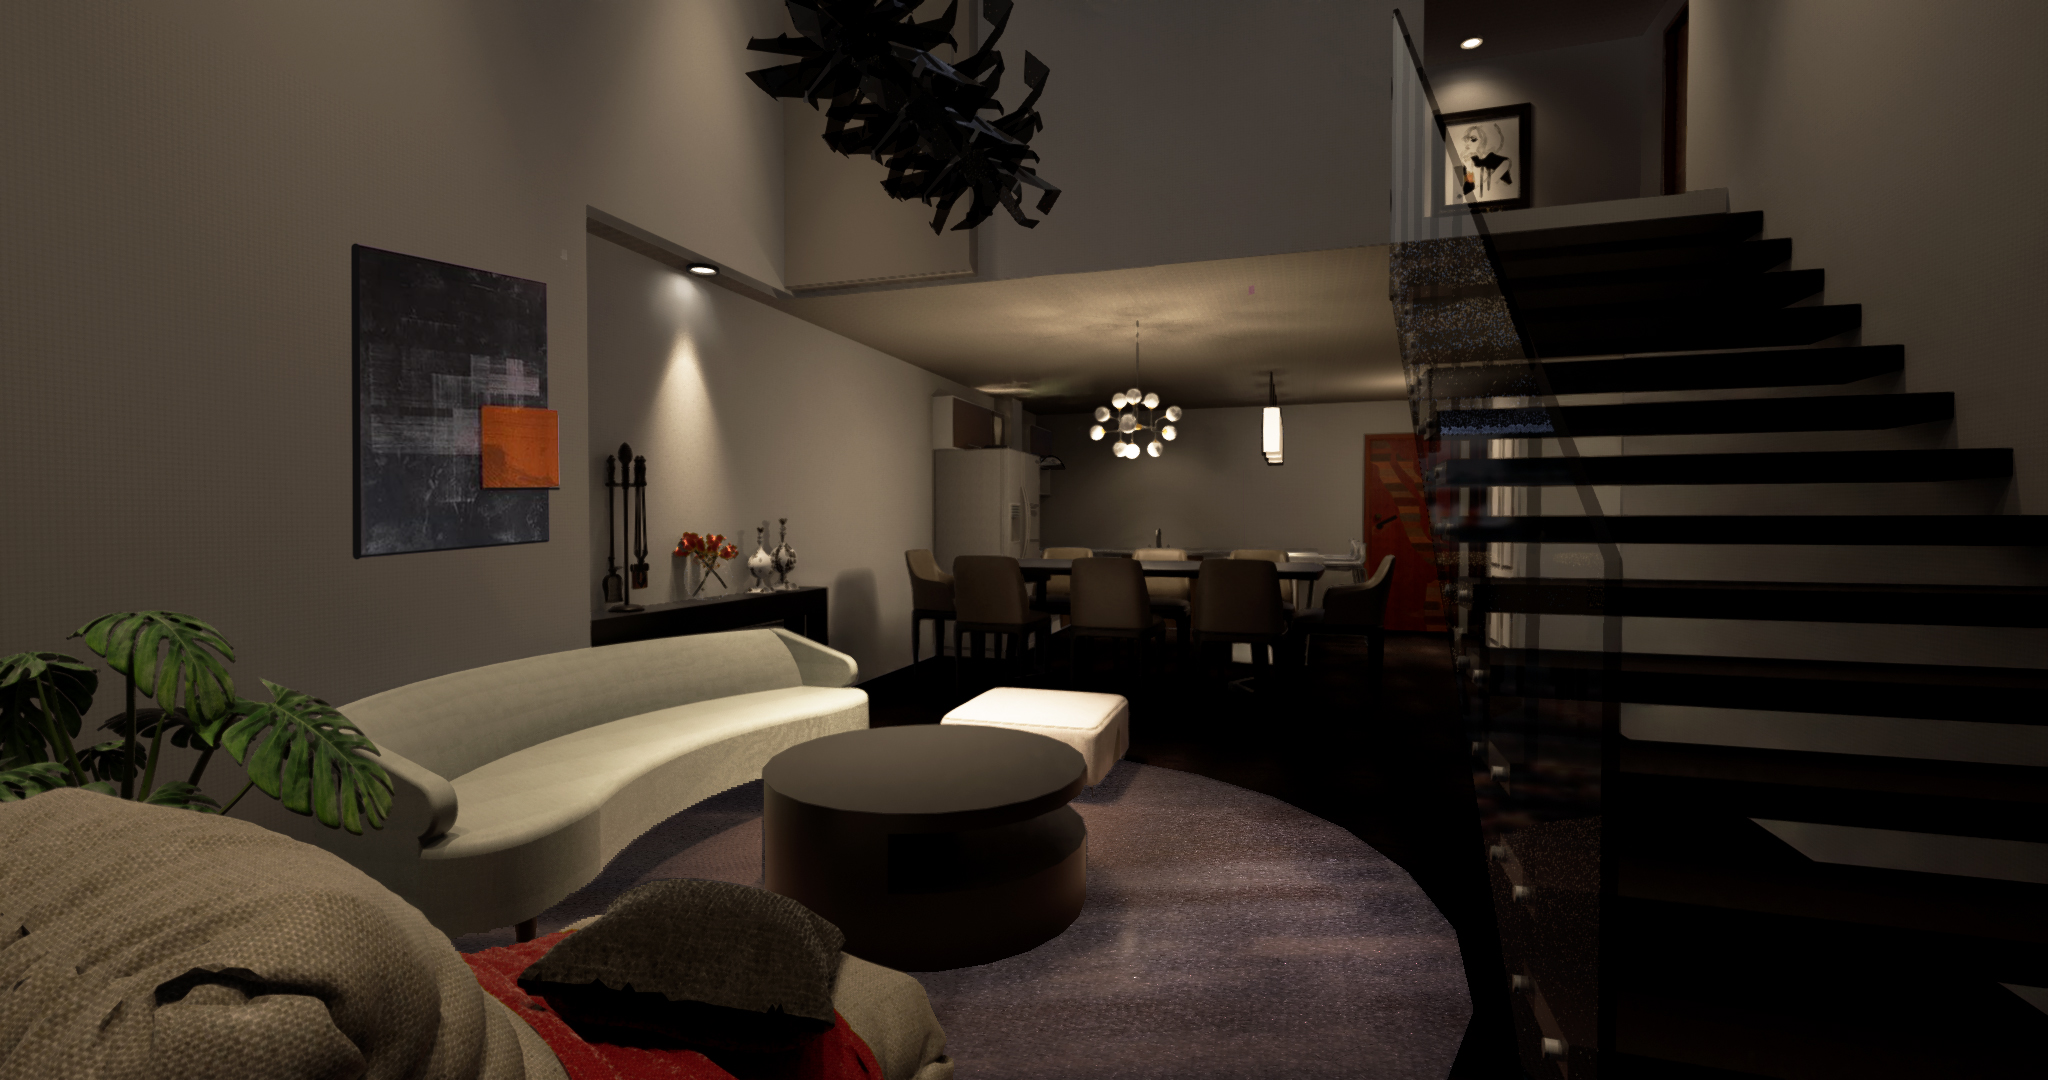 Residential Penthouse Condo - Living Room (Night)